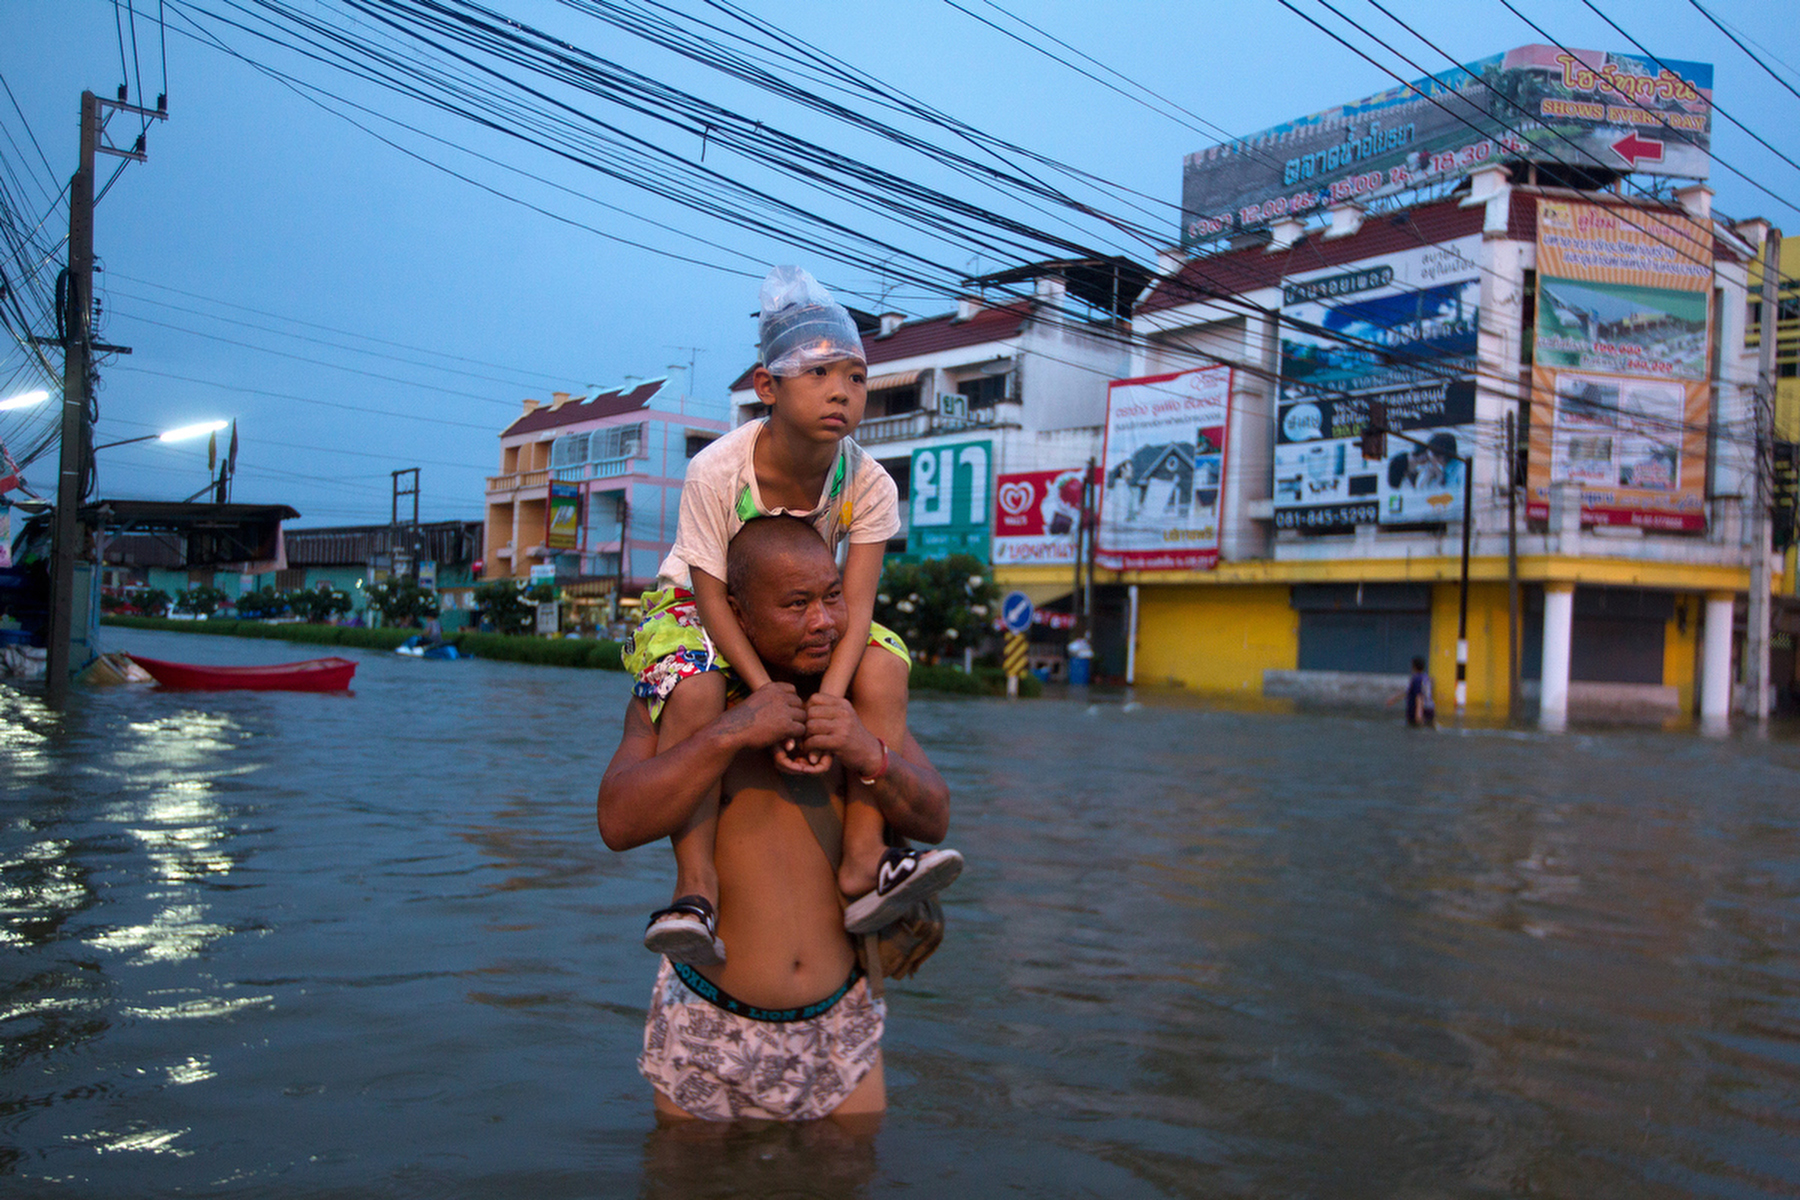 AYUTTHAYA,THAILAND - OCTOBER 10TH:  A Thai man holds his daughter a he wades through the flooded streets October 10, 2011 in Ayutthaya, Thailand Around 200 factories closed in the central Thai province of Ayutthaya because of flooding, which is posing a threat to Bangkok as well. Over 260 people have died in flood-related incidents since late July according to the Department of Disaster Prevention and Mitigation. Some areas of the country are experiencing the worst flooding in 50 years, mainly in the centre, north and northeast.(Photo by Paula Bronstein /Getty Images)